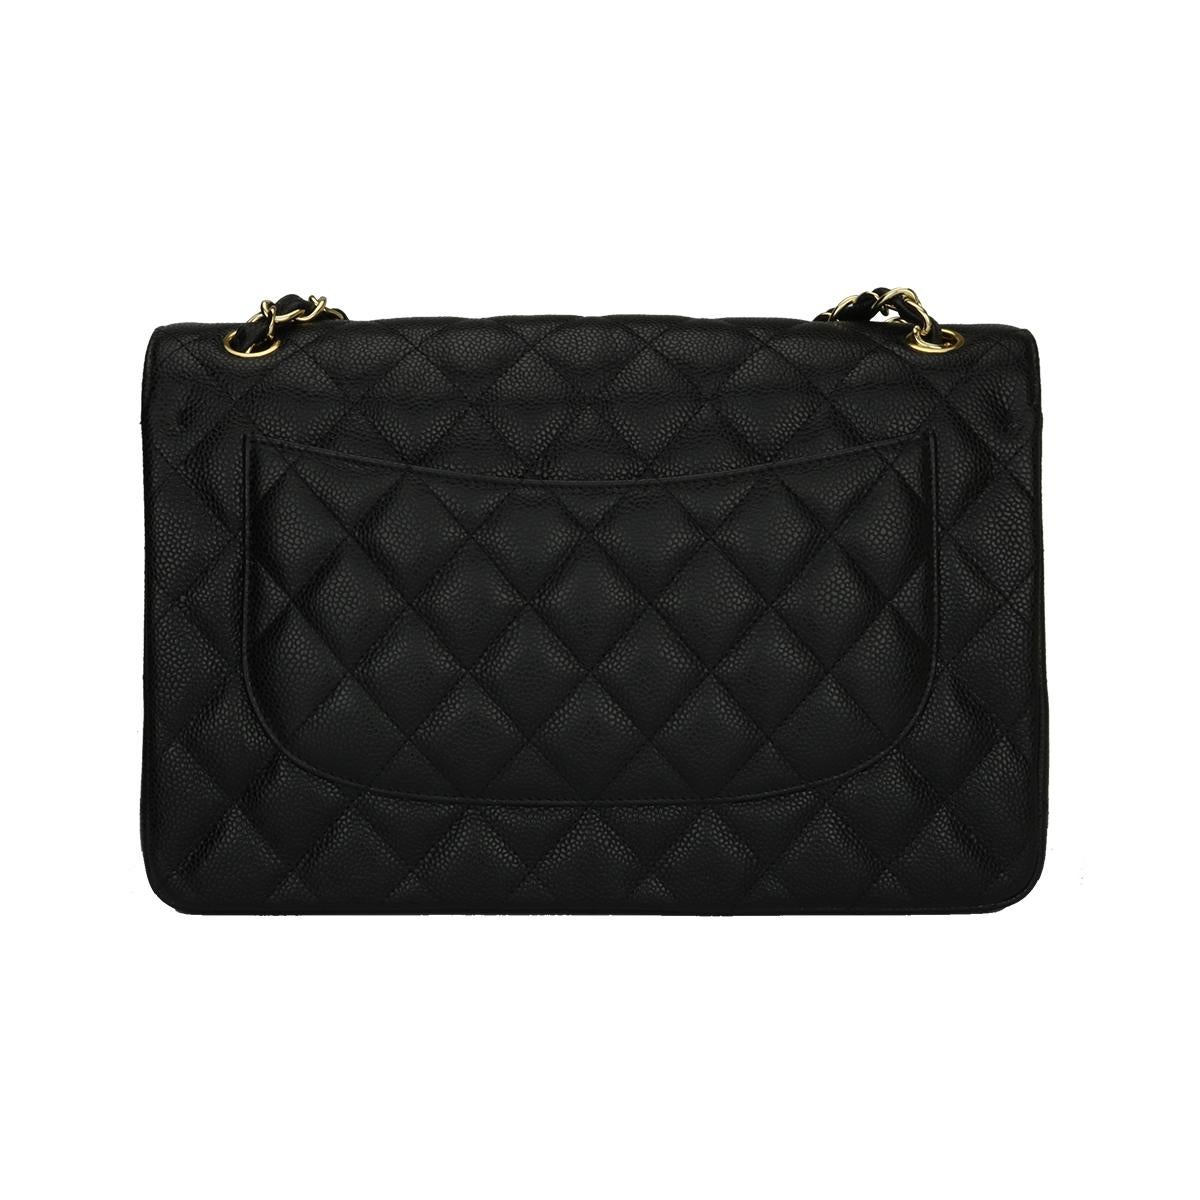 Women's or Men's CHANEL Classic Jumbo Double Flap Bag Black Caviar with Gold Hardware 2014